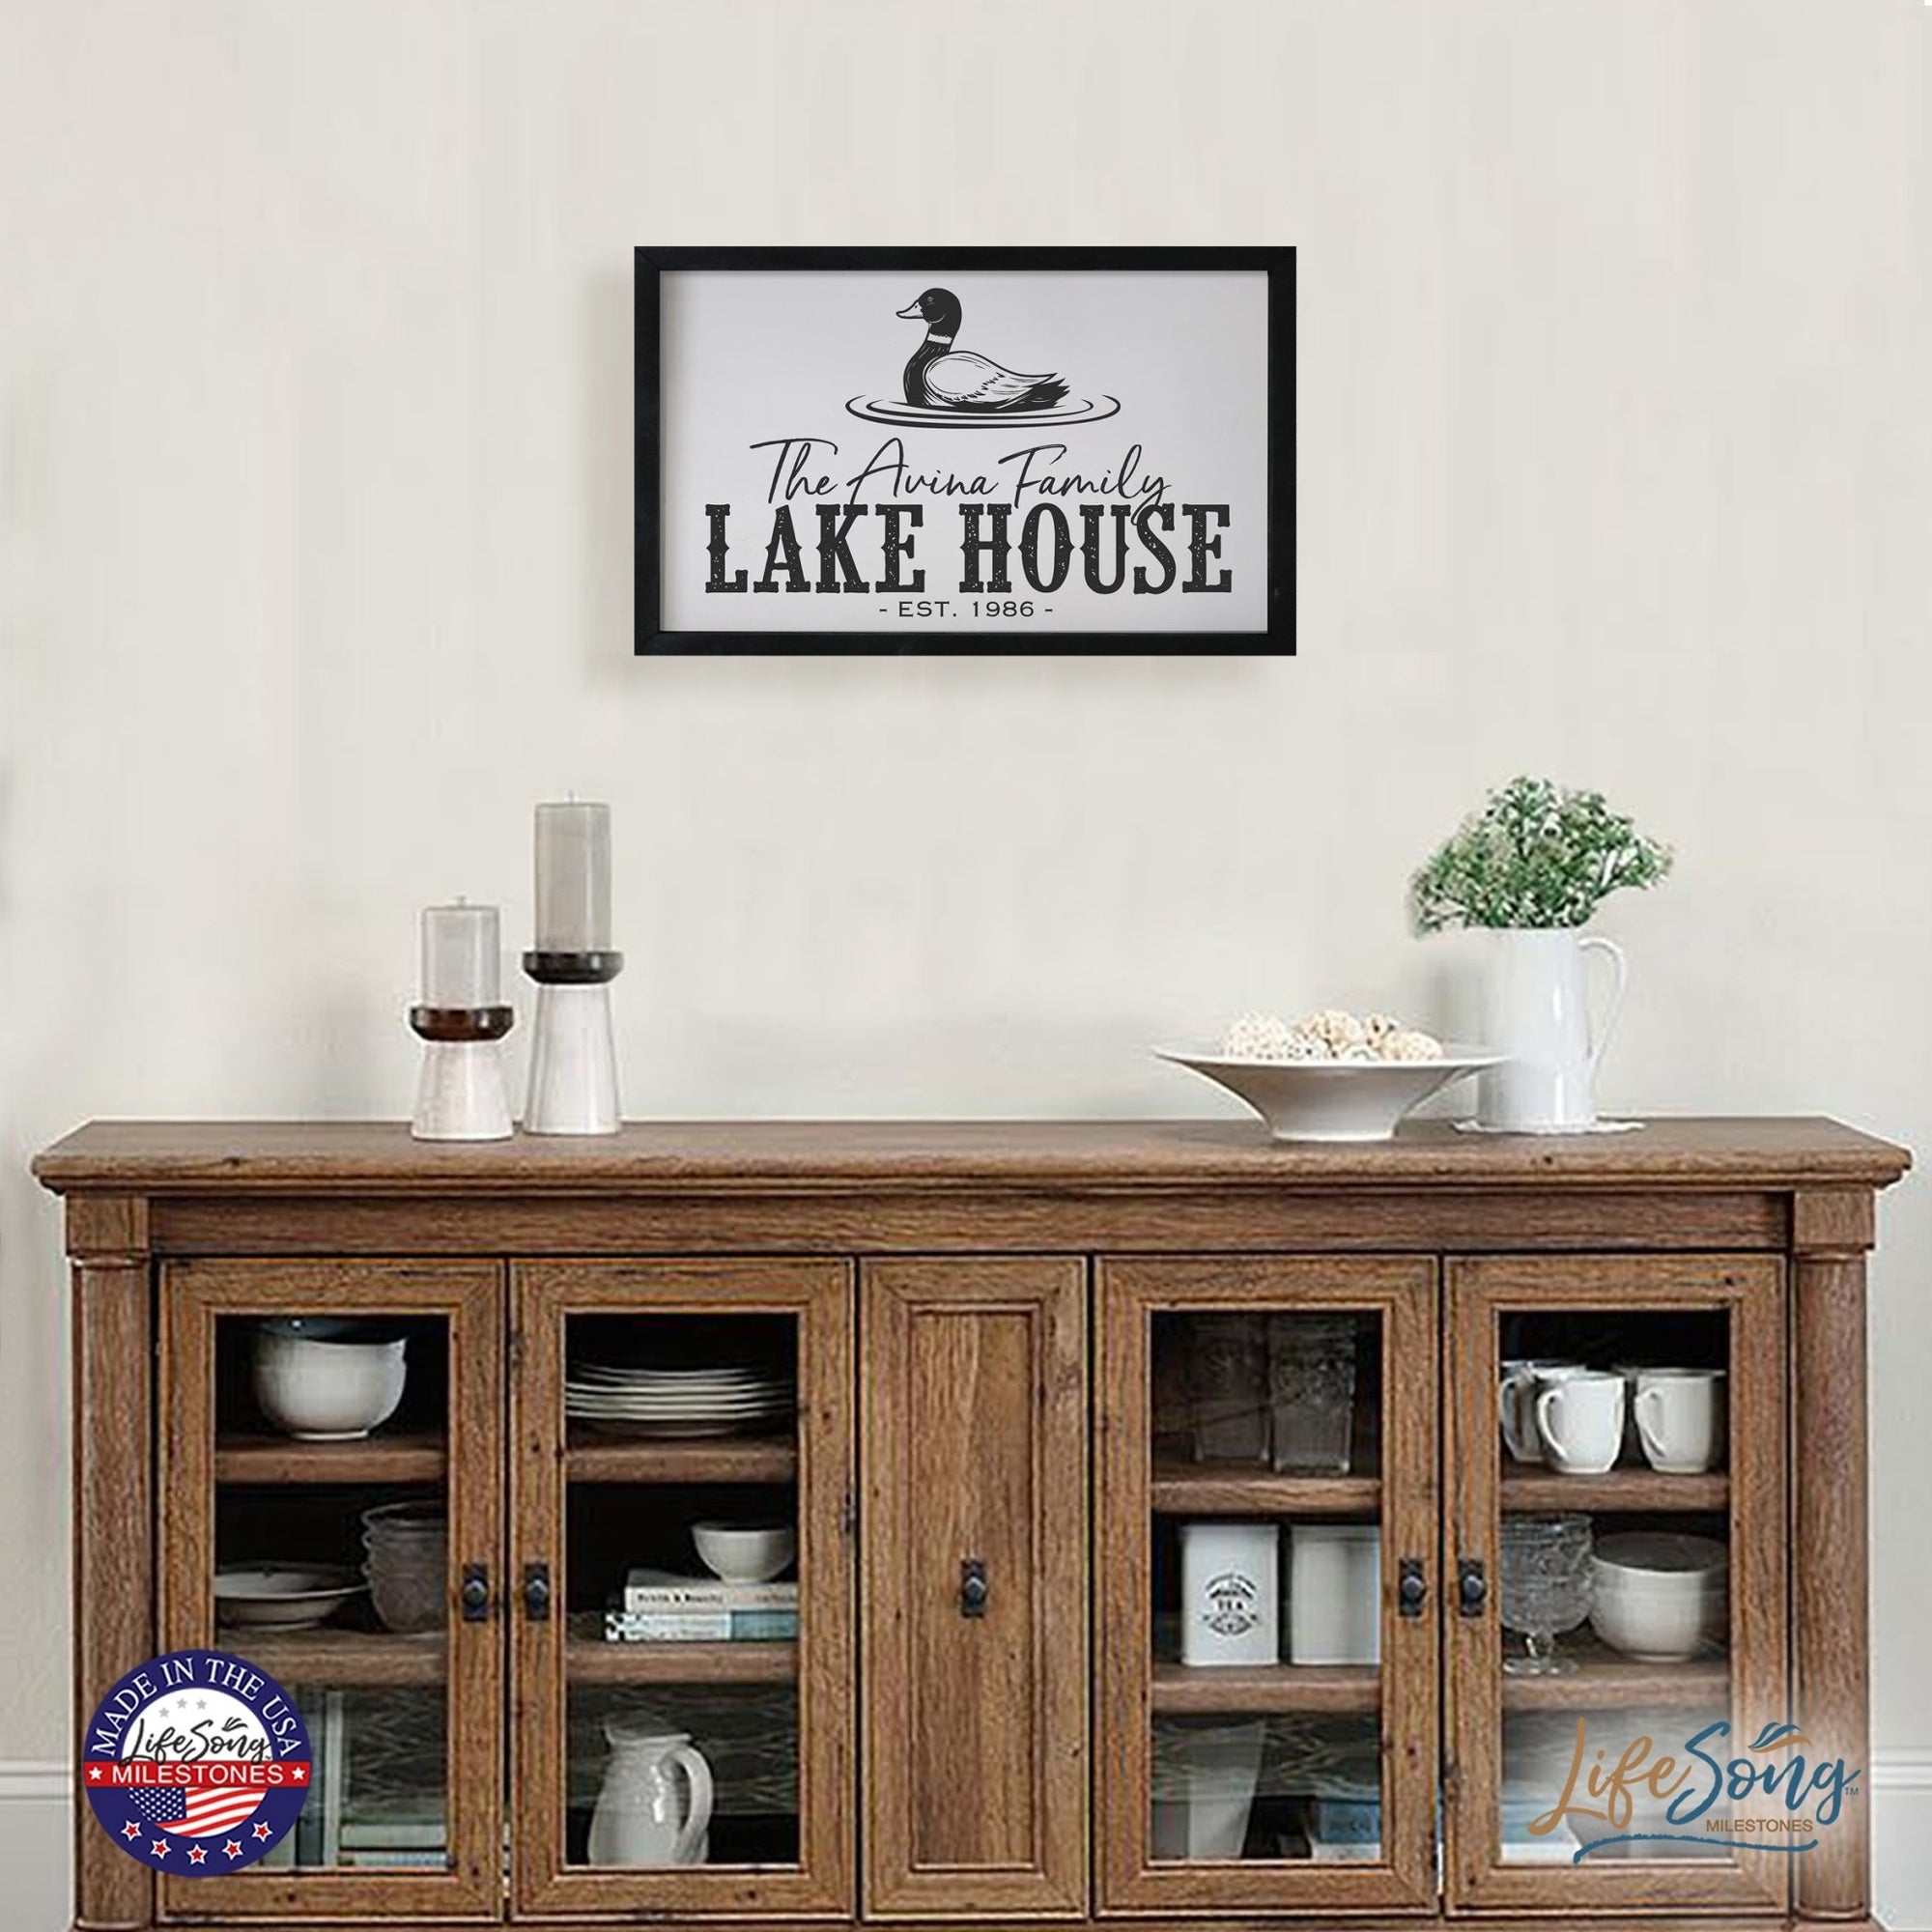 Inspirational Personalized Framed Shadow Box 16x25 - Lake House (Duck) - LifeSong Milestones